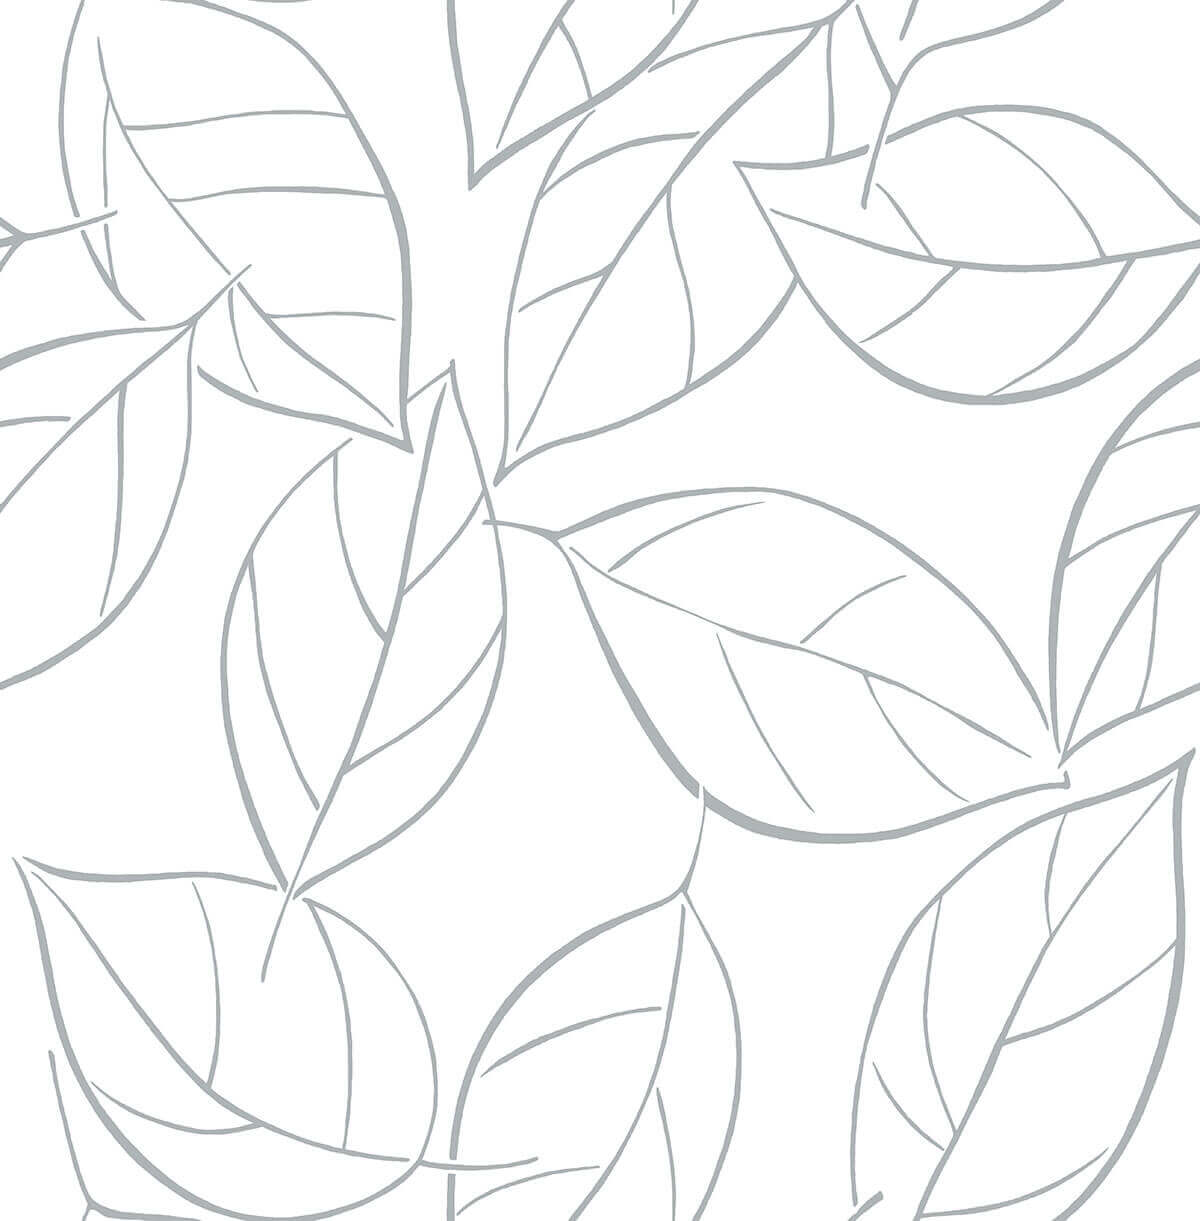 NextWall Tossed Leaves Peel and Stick Wallpaper - SAMPLE